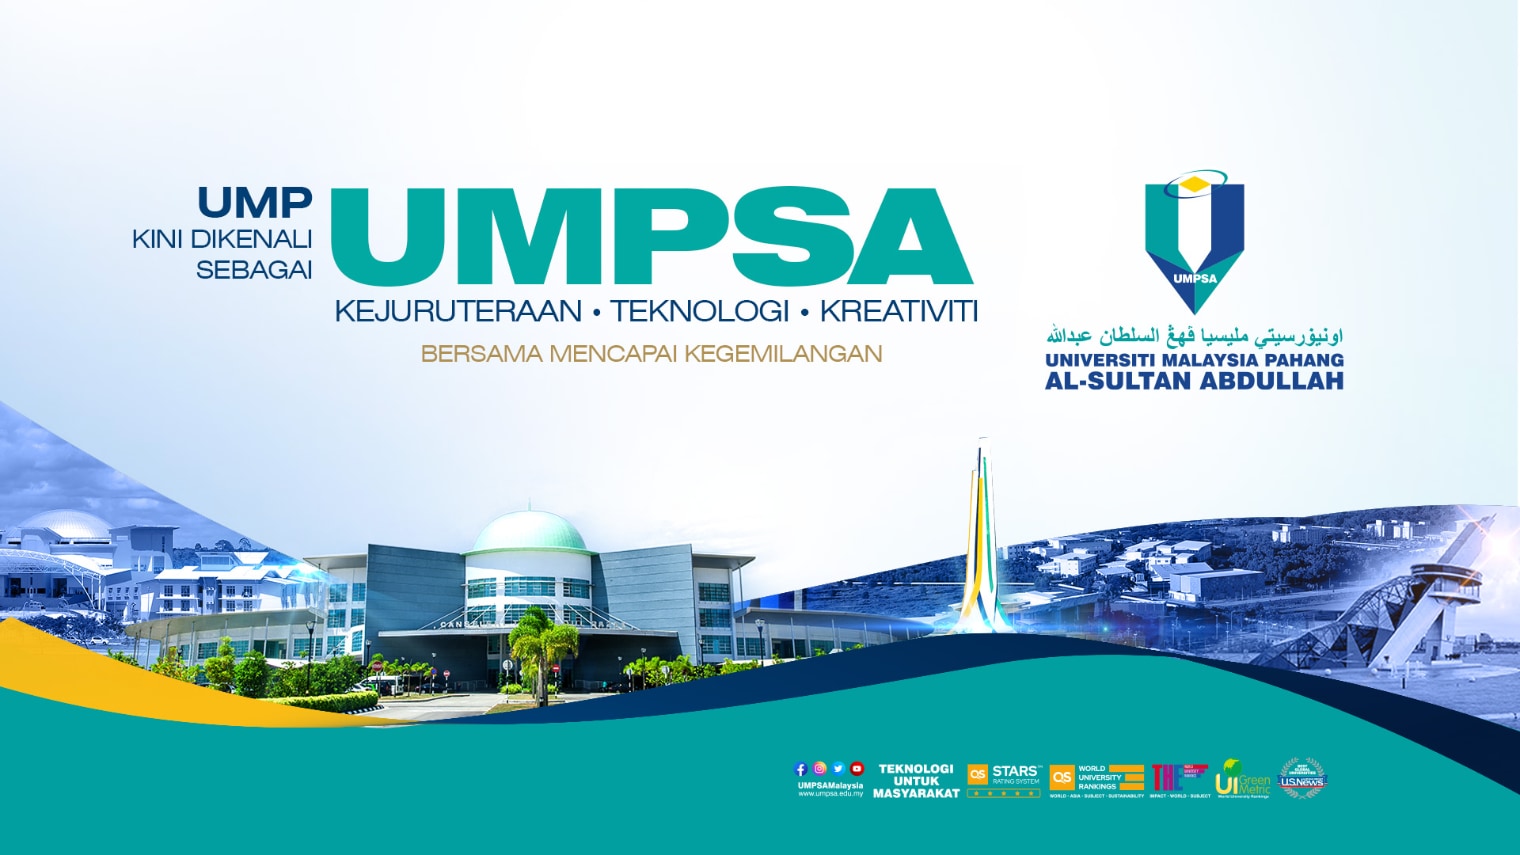 Pahang's UMP now known as UMPSA